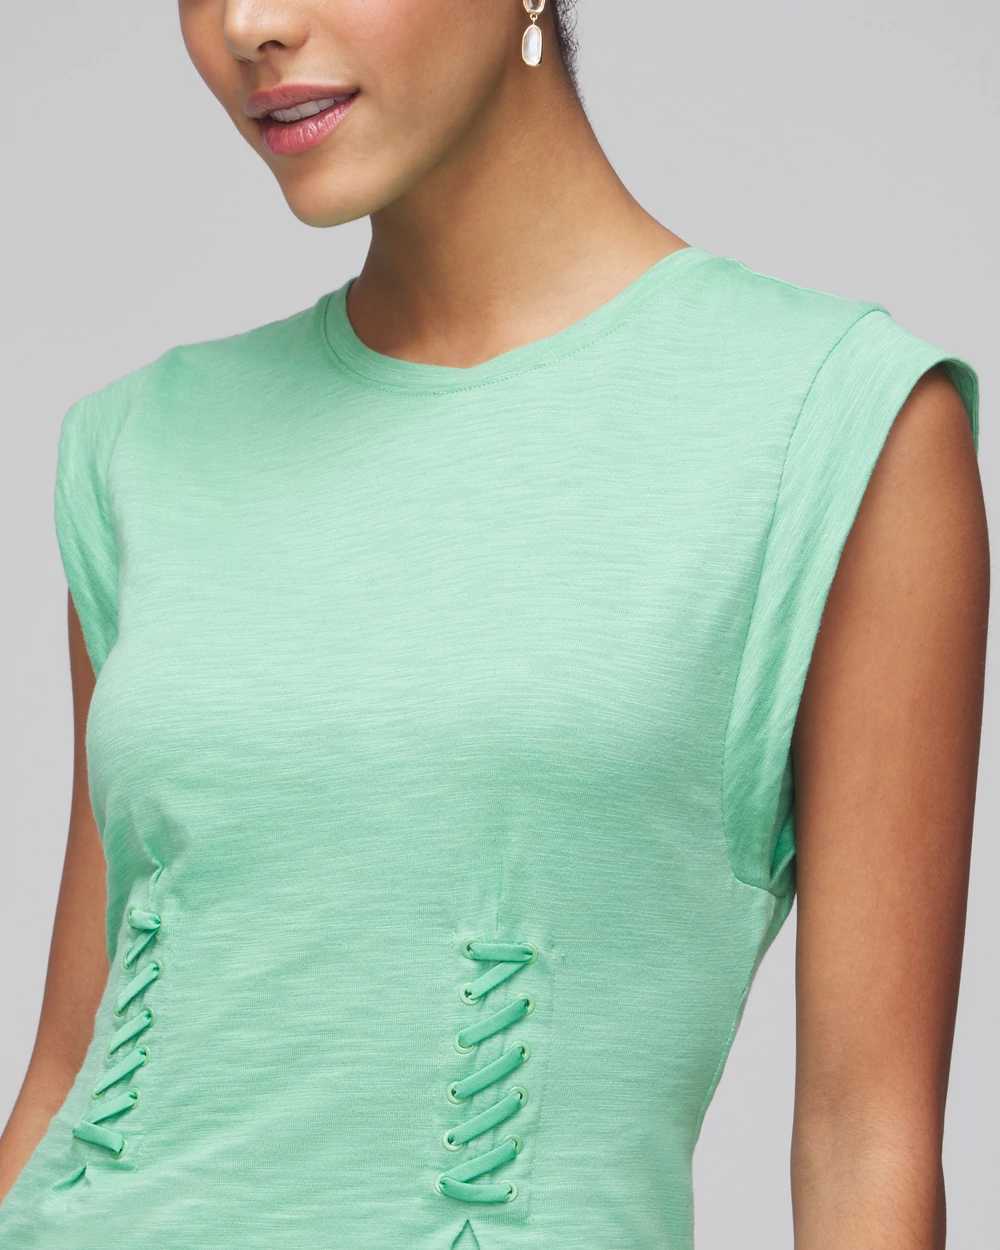 Lace-Up Bodice Tee click to view larger image.